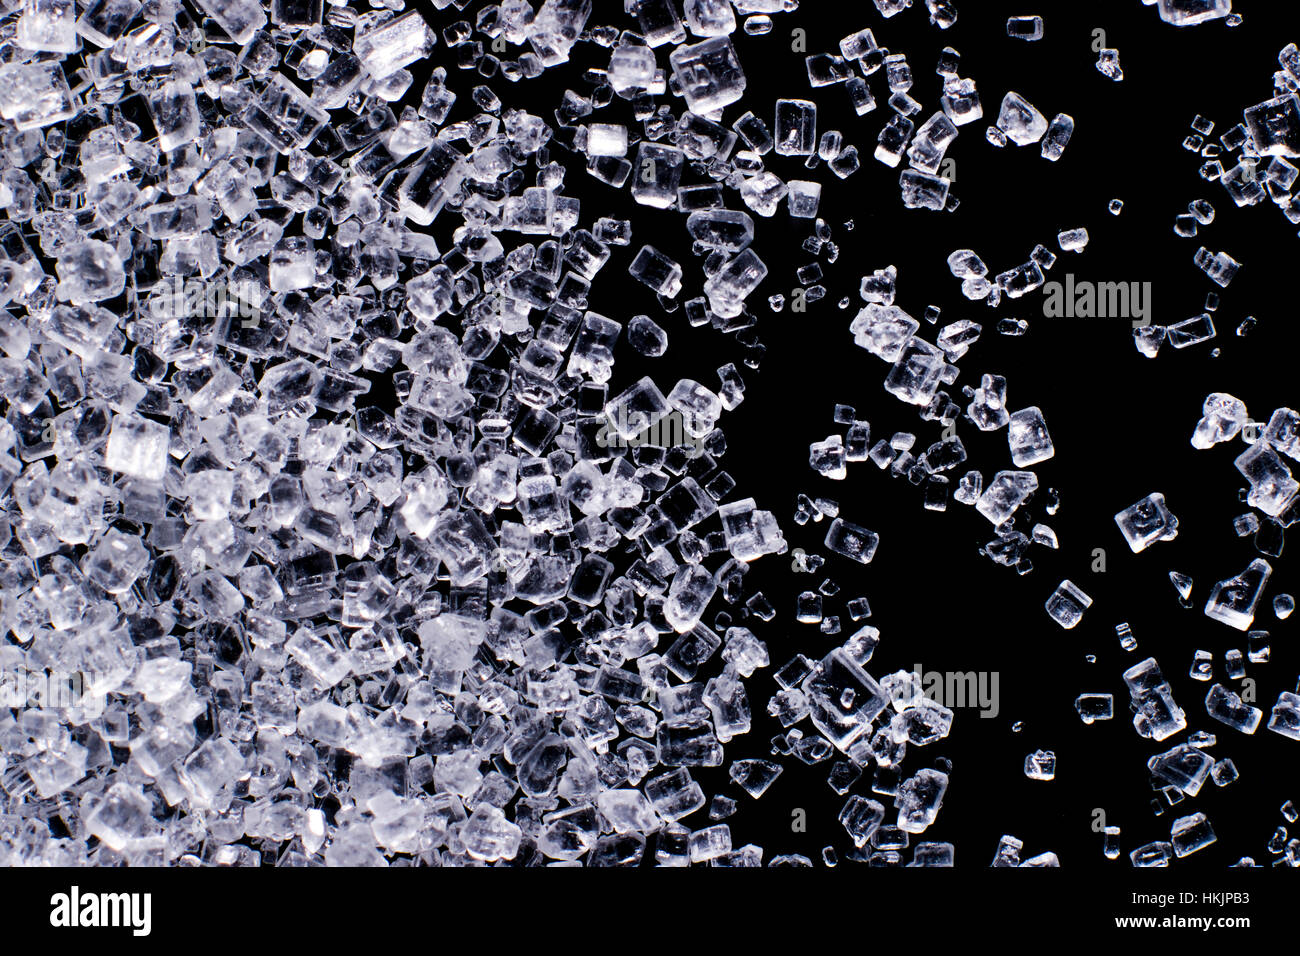 White refined sugar crystals close up Stock Photo